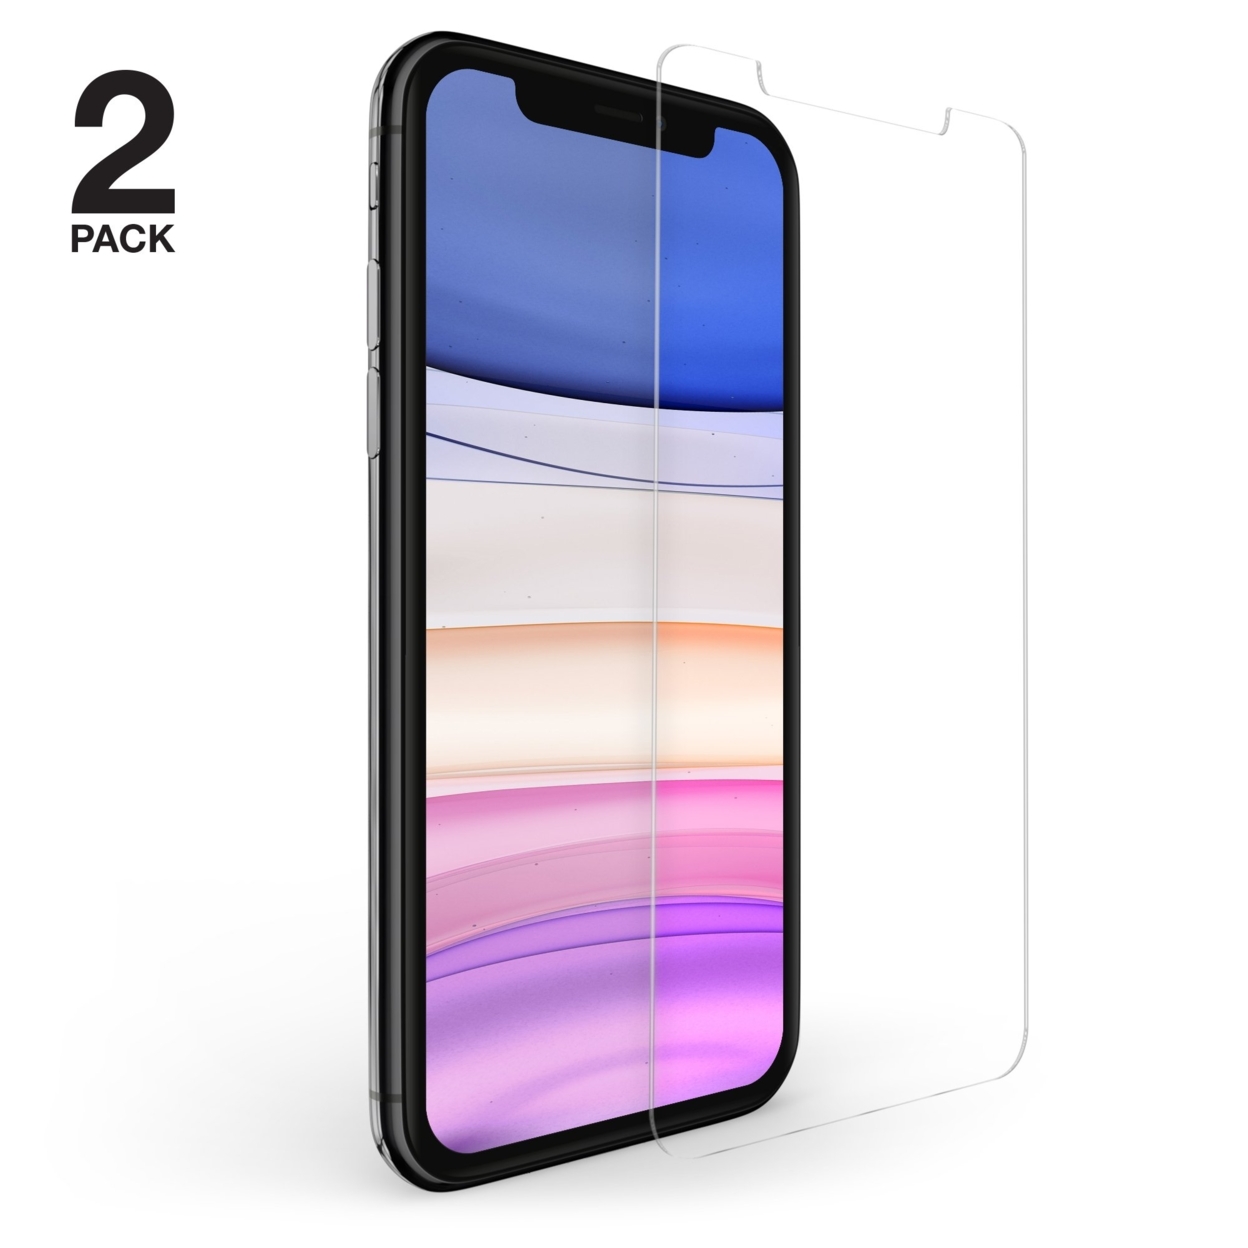 HyperGear HD Tempered Glass IPhone 11 Pro Max & XS Max - 2pck (15186-HYP)